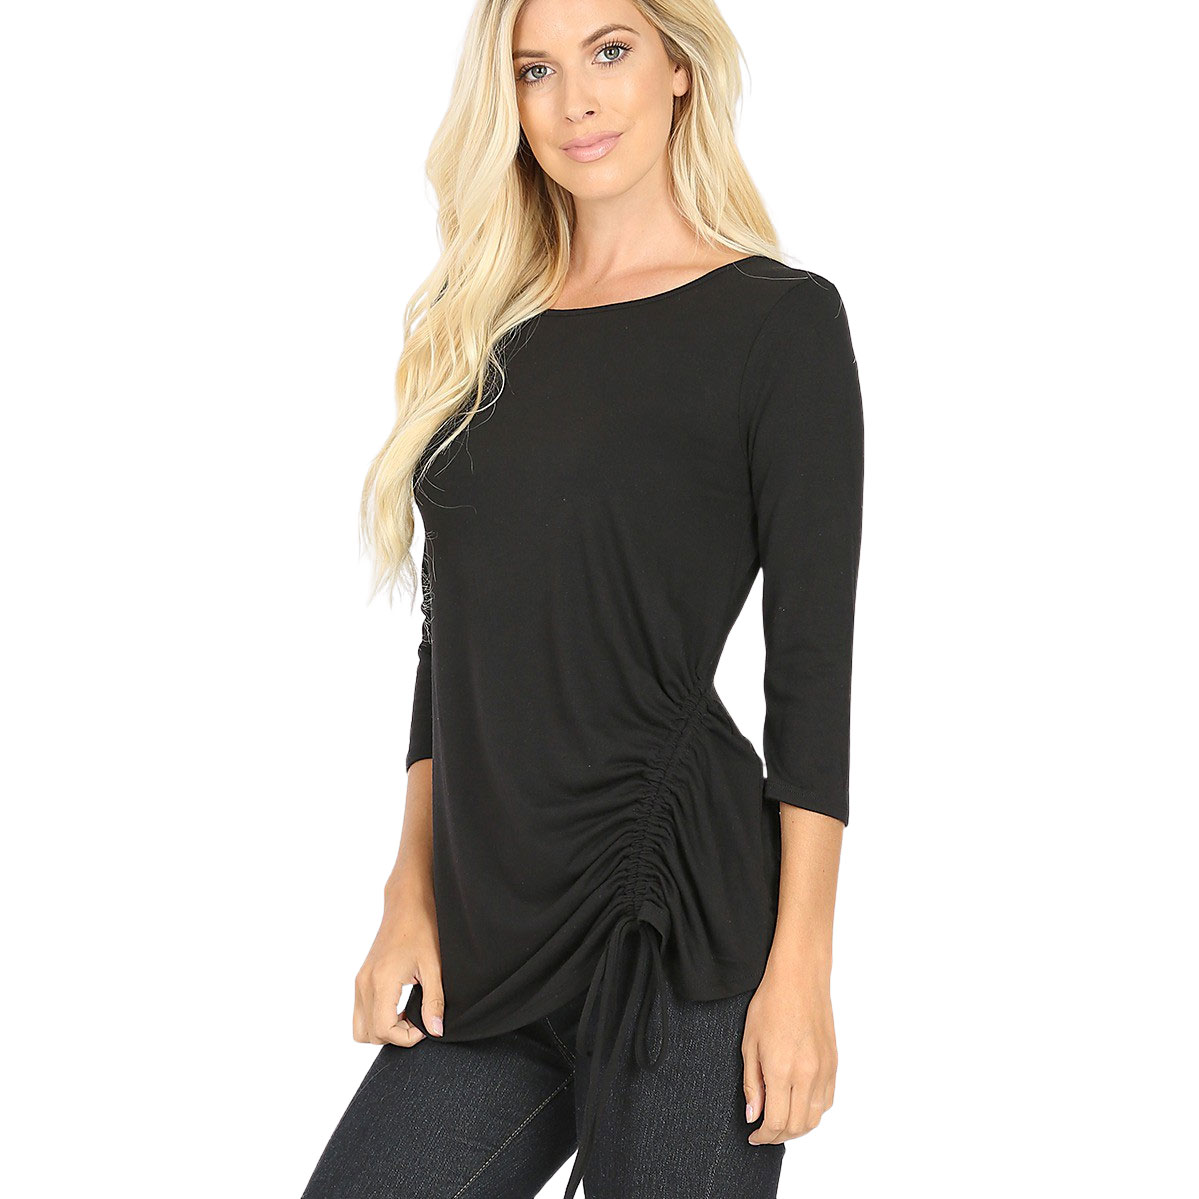 1887 - 3/4 Sleeve Ruched Tops BLACK 3/4 Sleeve Round Neck Side Ruched 1887 - Large